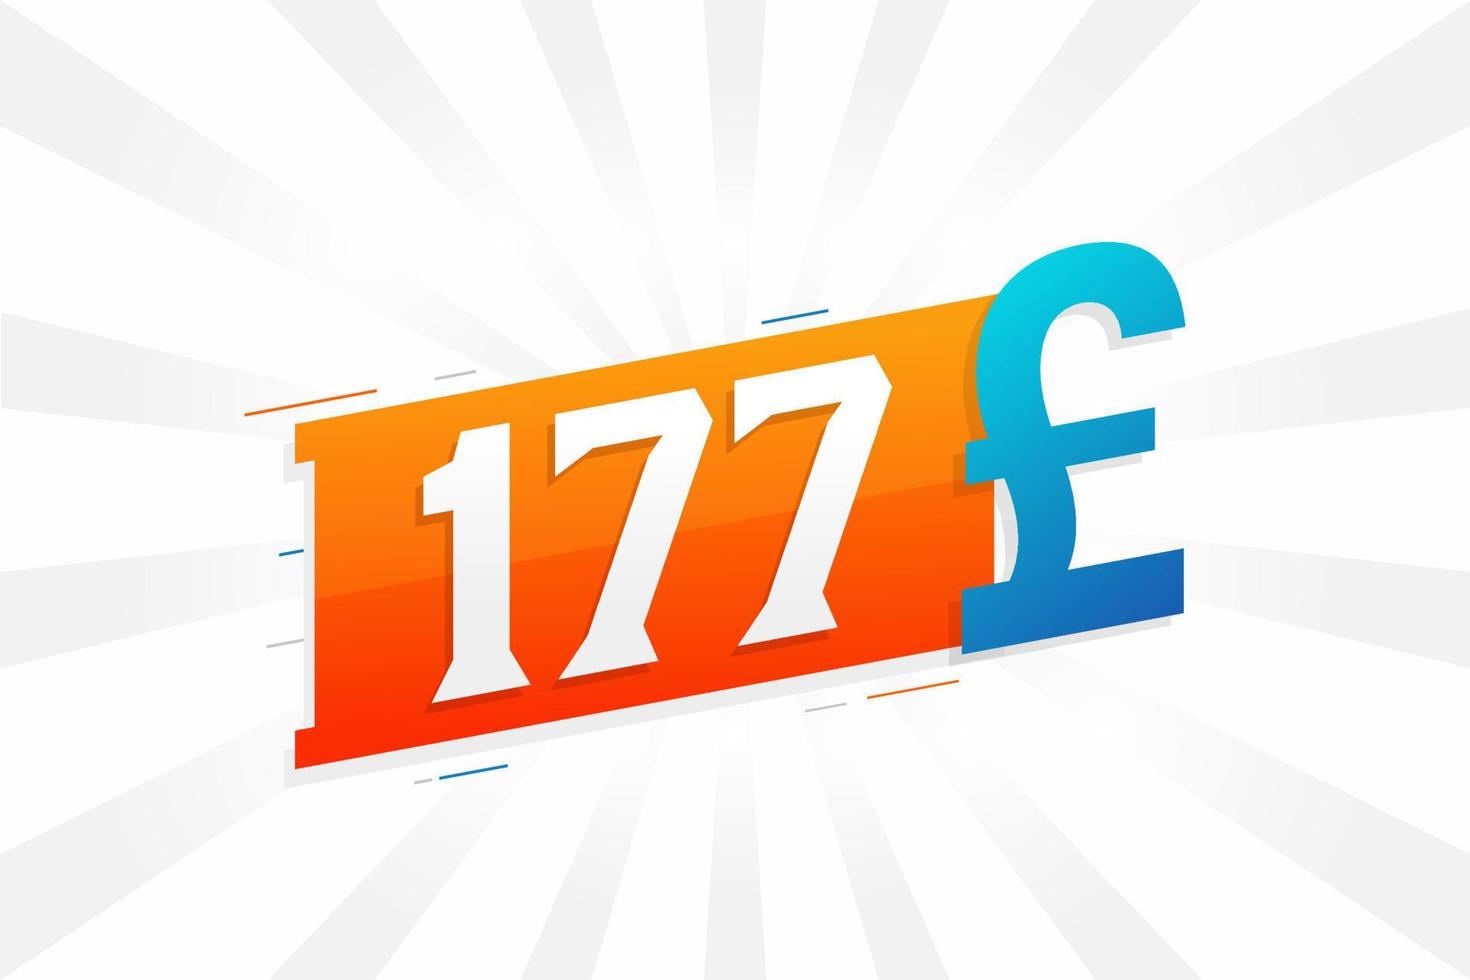 177 Pound Currency vector text symbol. 177 British Pound Money stock vector